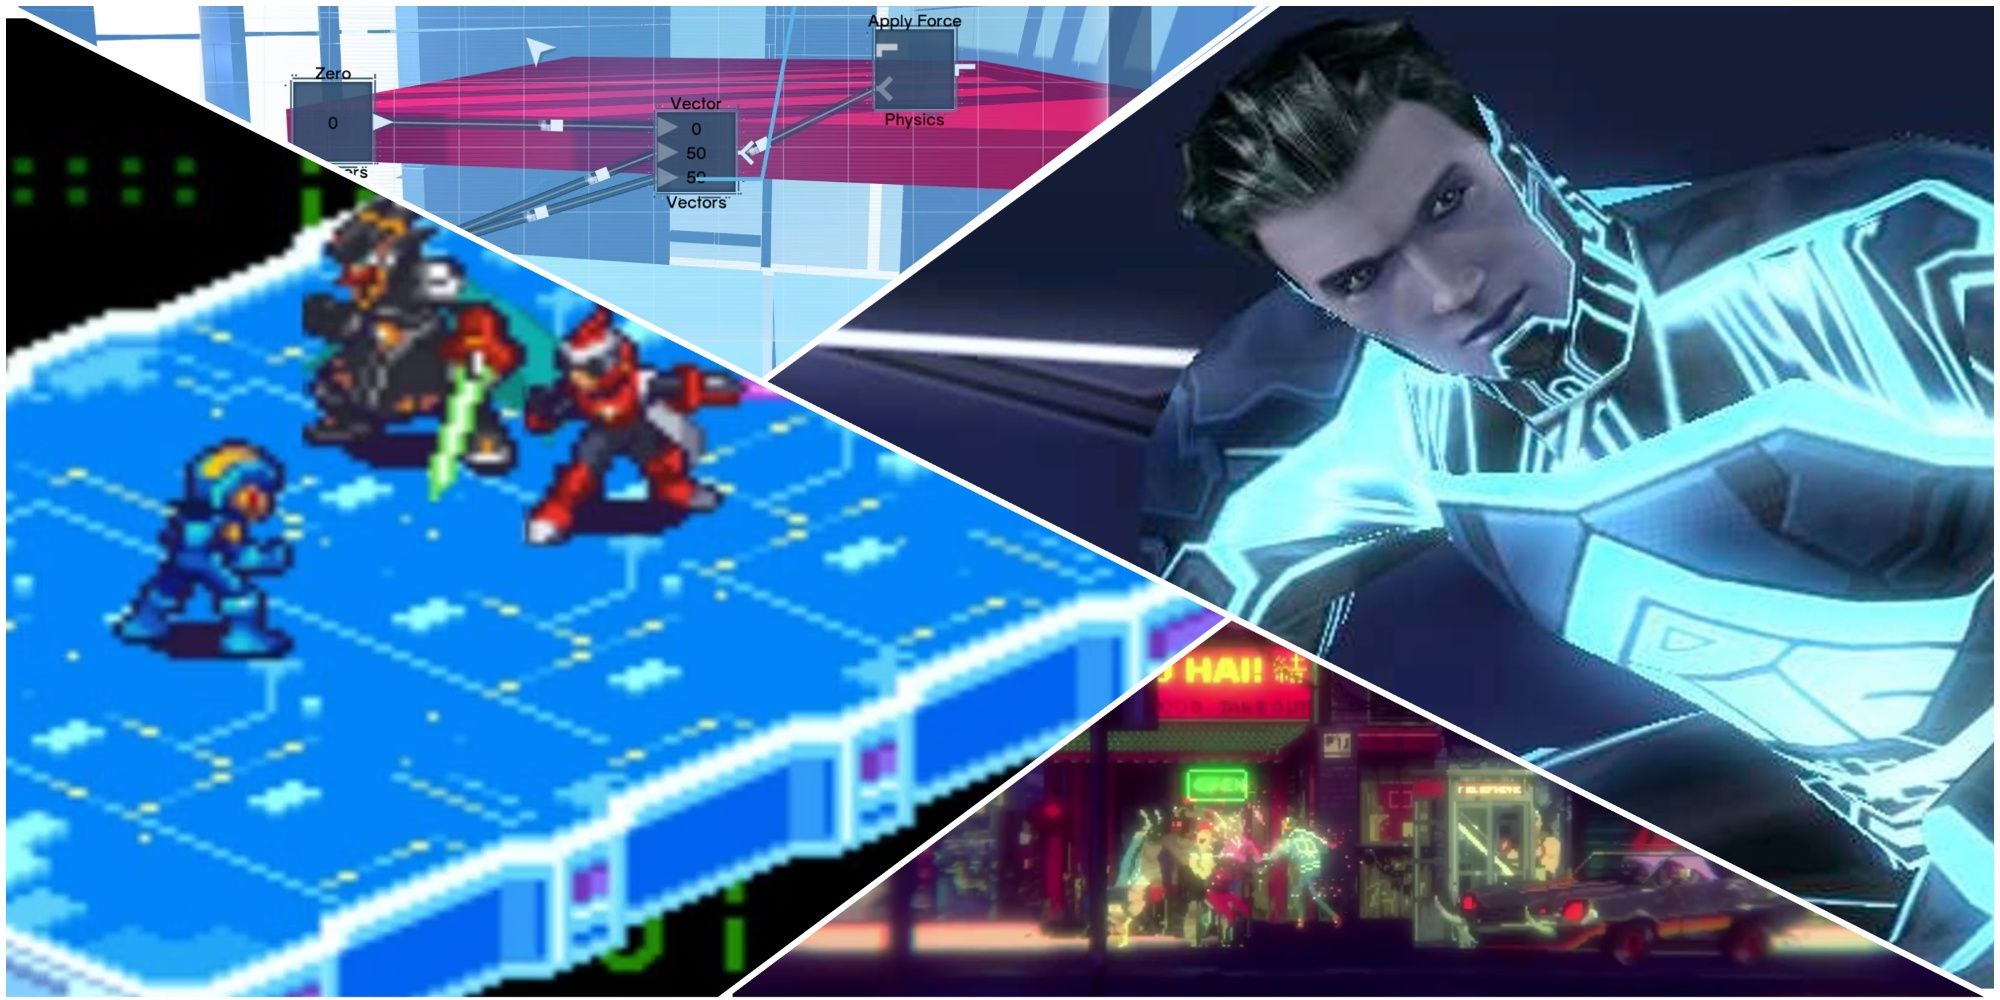 Left: Mega Man battling two foes. Top-left: A node-based interface against a red platform. Right: Jet Bradley in a neon-blue uniform. Bottom-right: A neon city street.